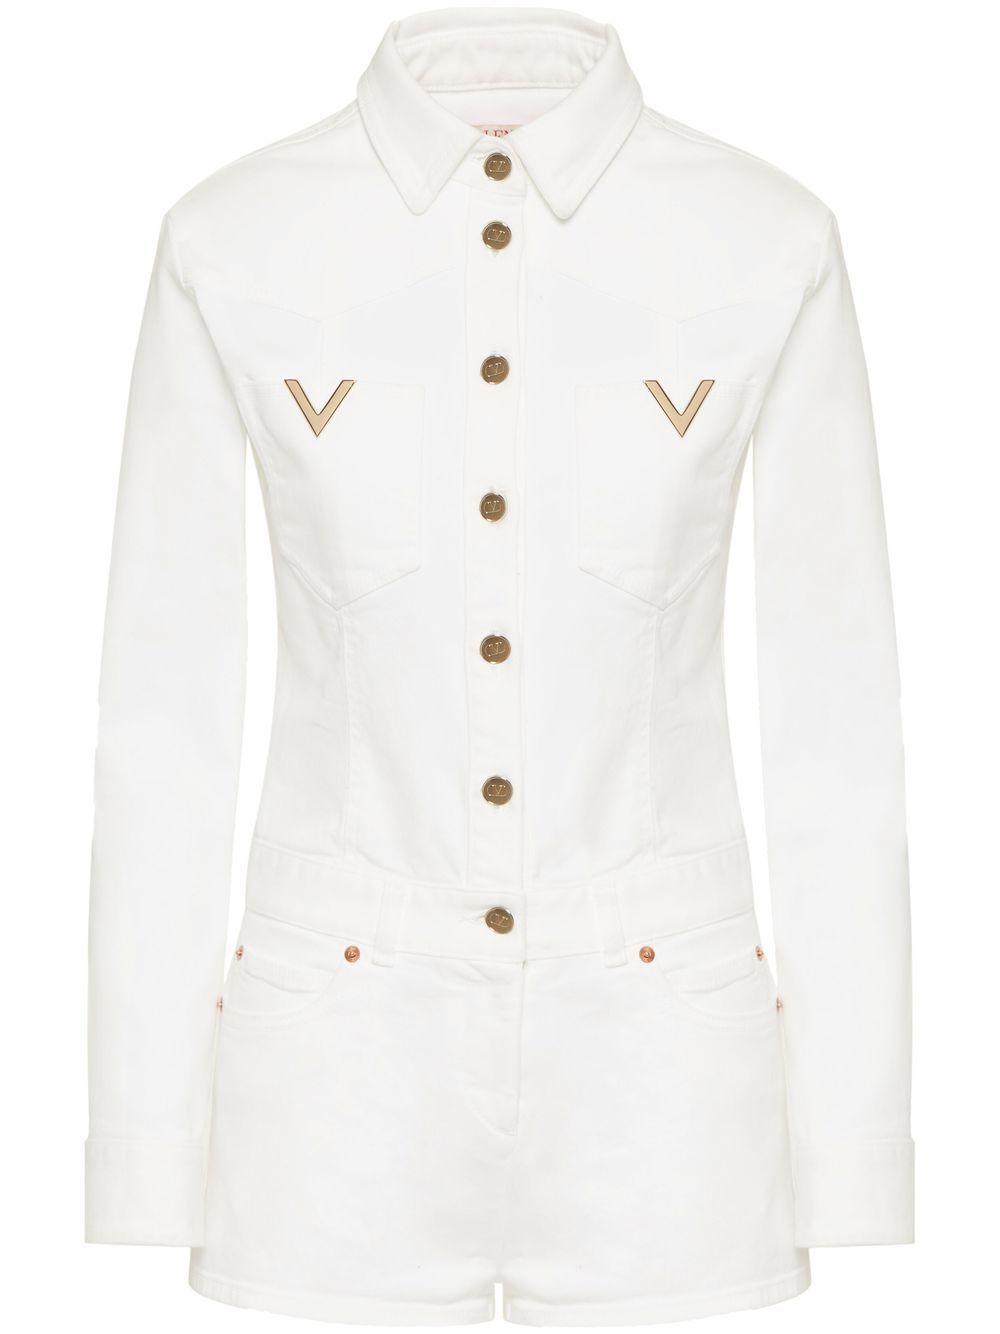 VALENTINO VGOLD-DETAIL BUTTONED-UP PLAYSUIT